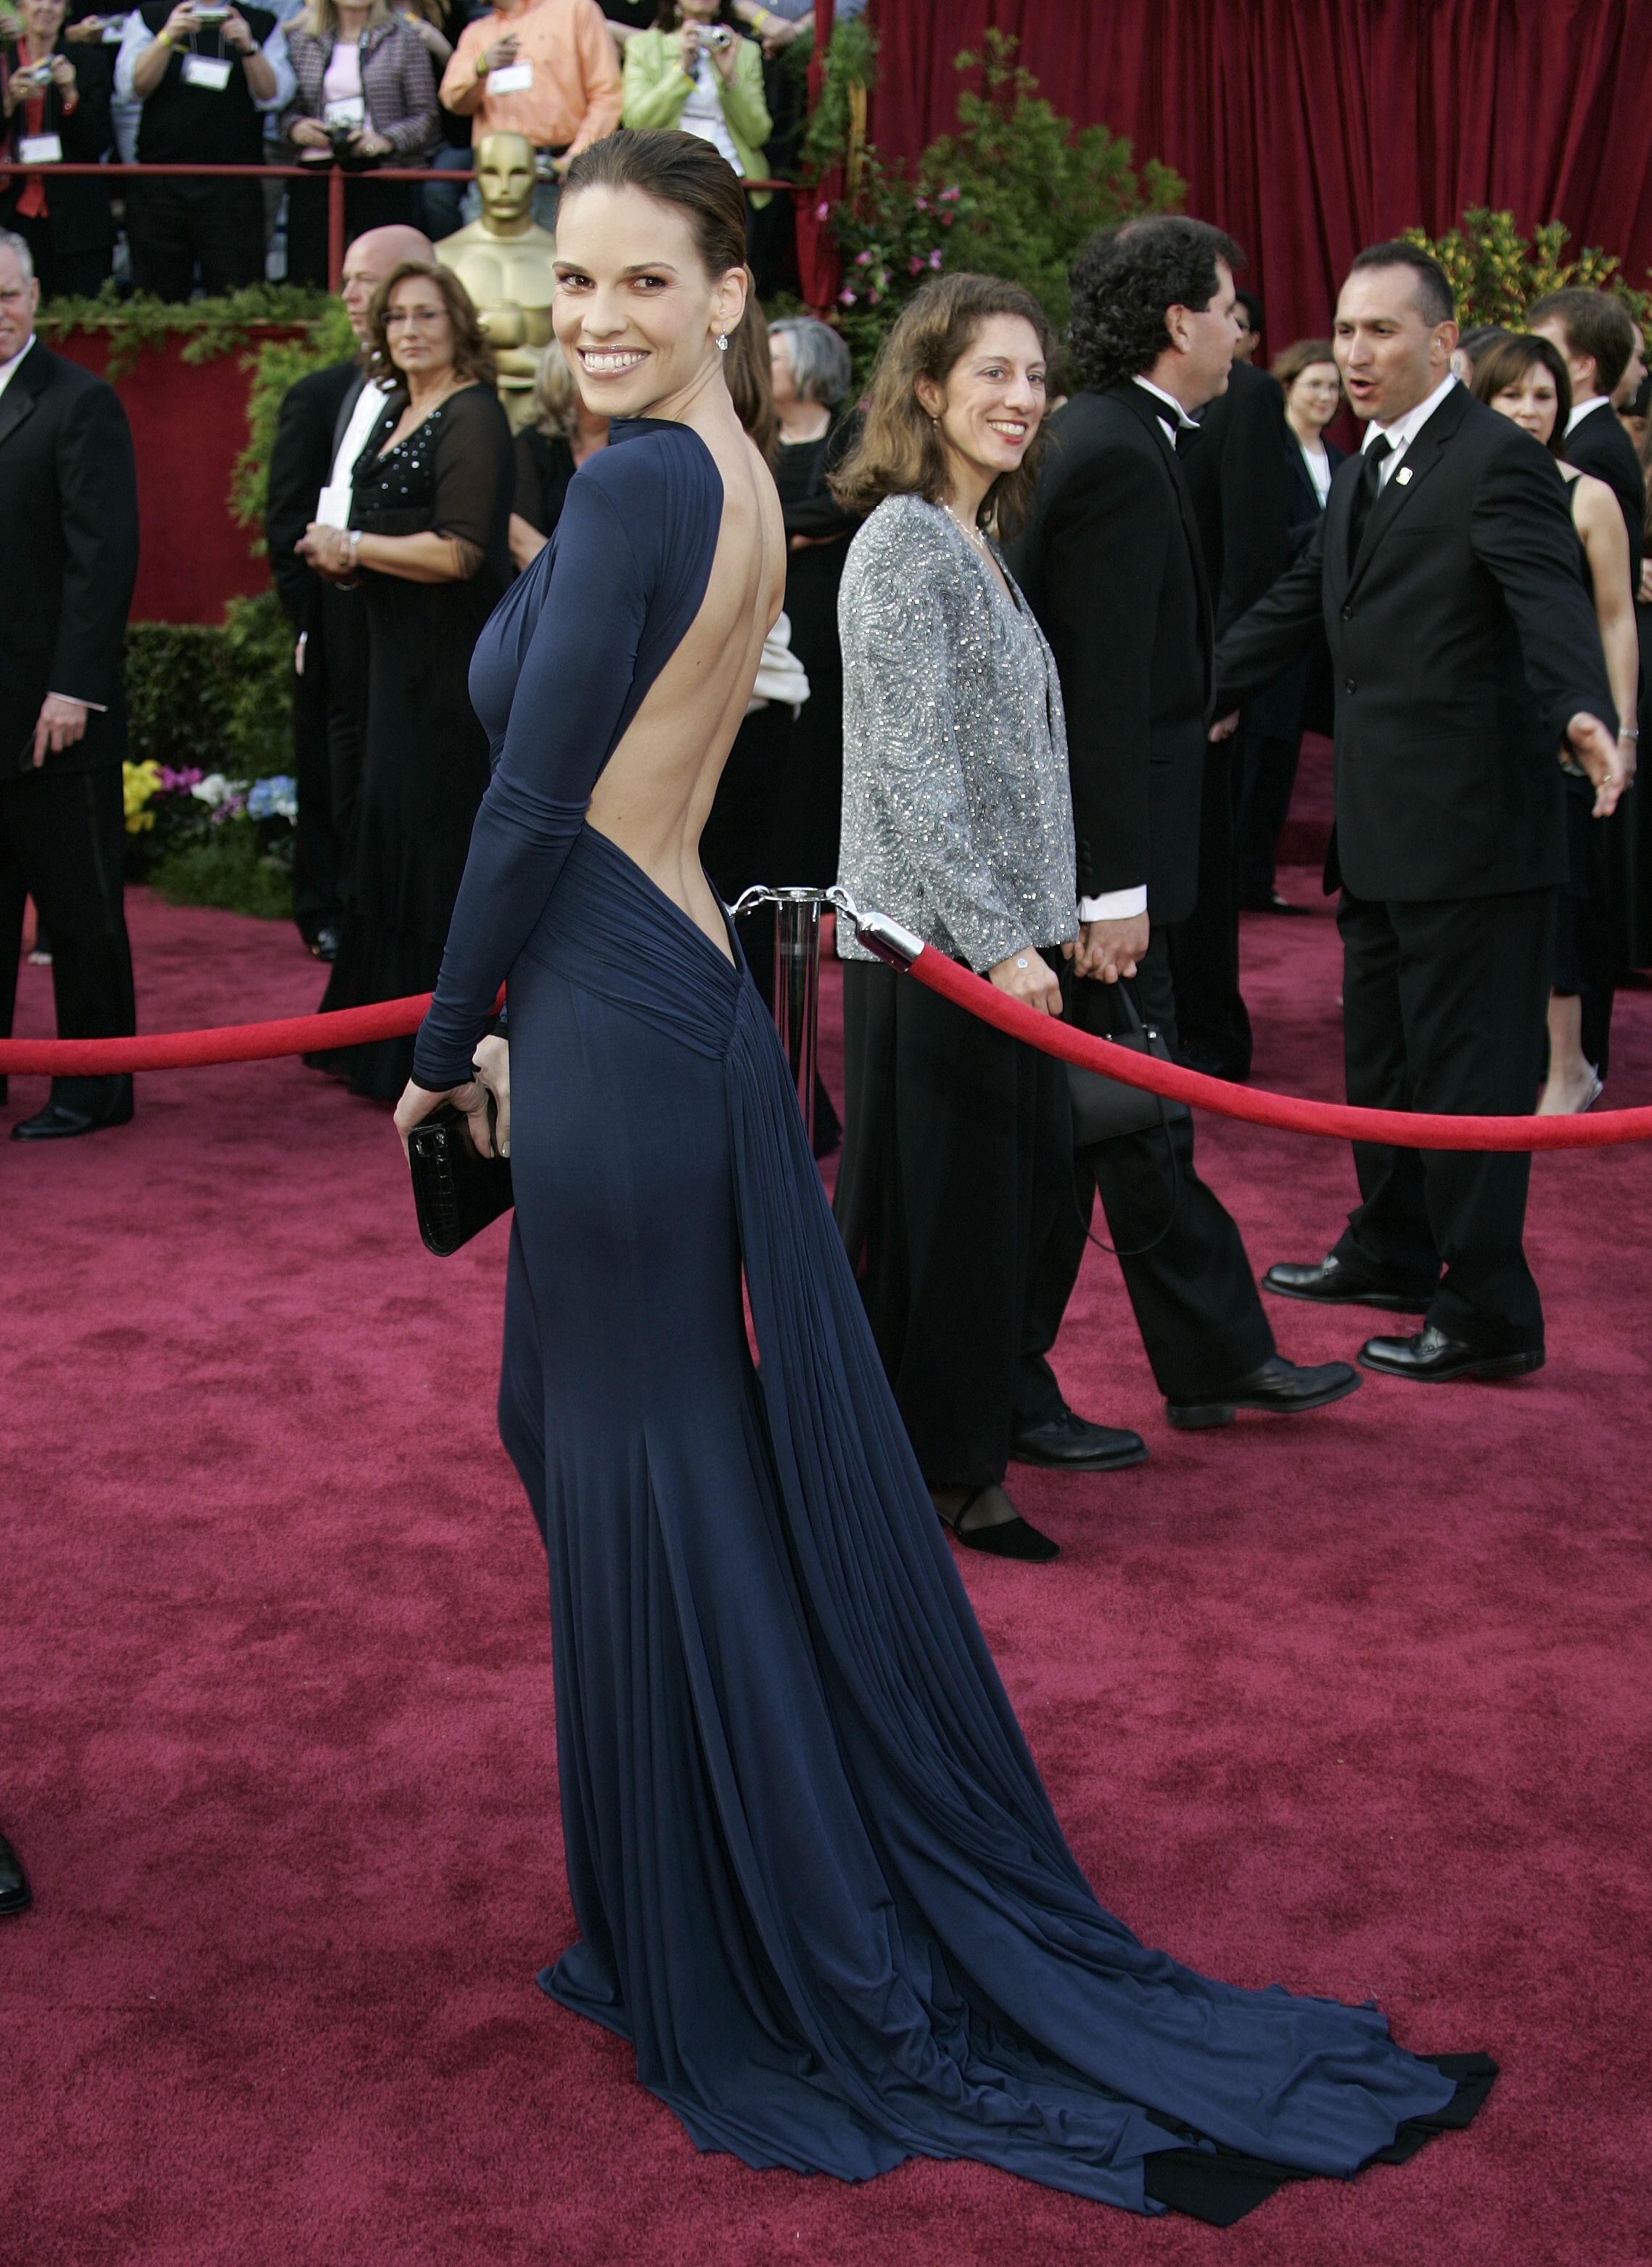 Actress Hilary Swank, nominated for Best Actress for her role in "Million Dollar Baby," arrives for the 77th Academy Awards 27 February, 2005, at the Kodak Theater in Hollywood, California. AFP PHOTO/